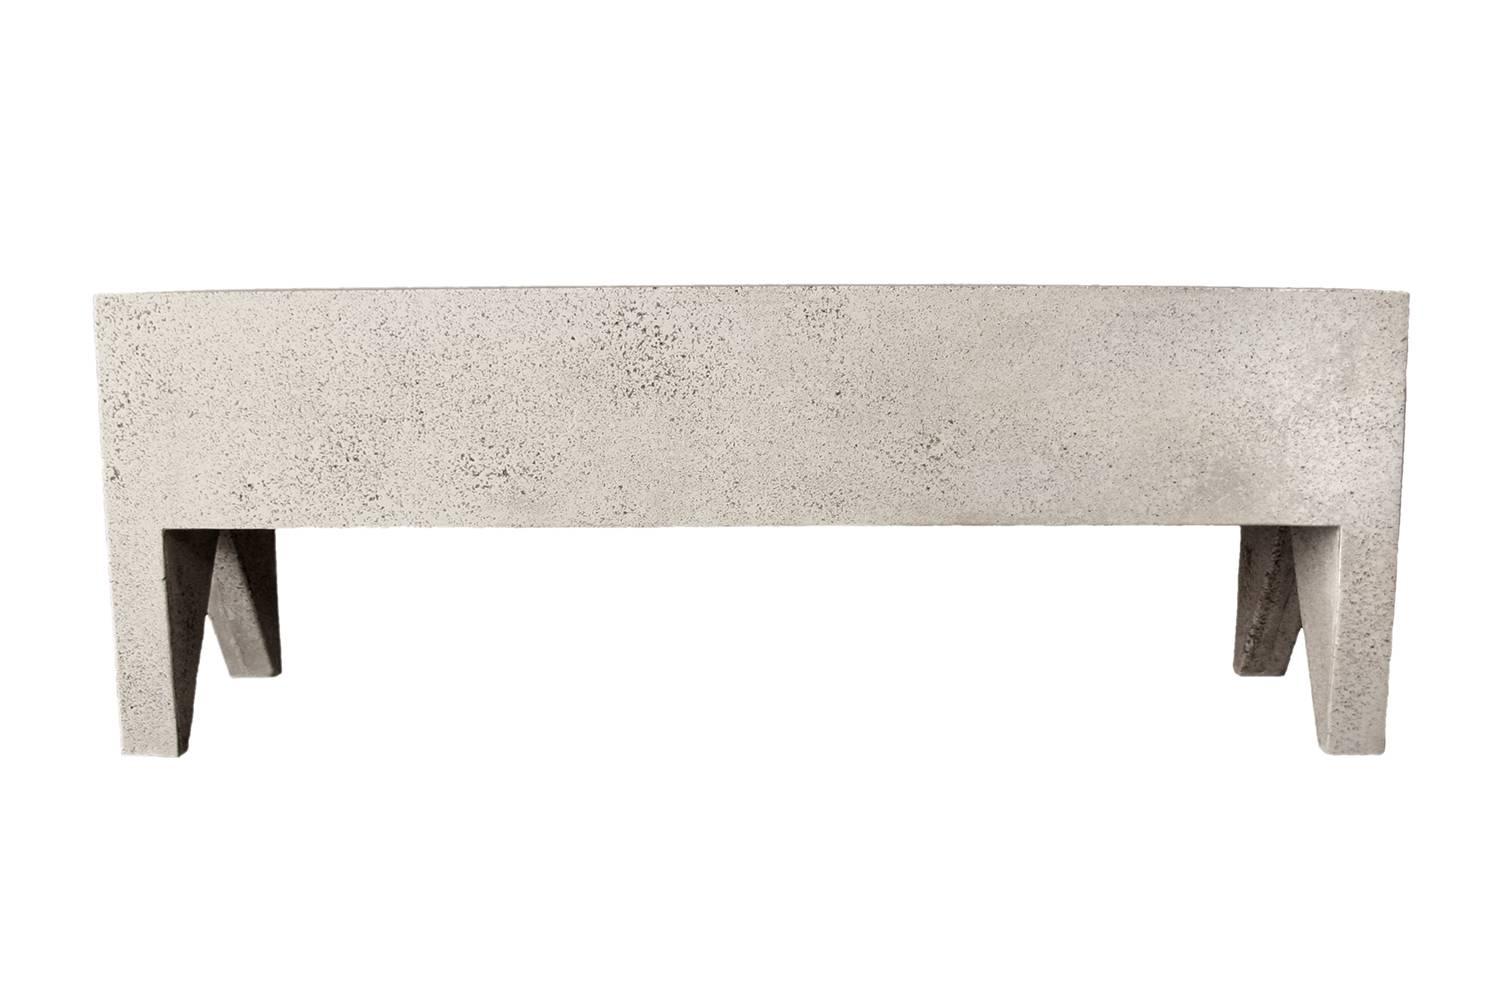 A hint of ornament. Americana at its brutalist functional extreme.

Dimensions: Width 50 in. (127 cm), depth 14 in. (35.5cm), height 18 in. (45.7 cm). Weight 45 lbs. (20.4 kg). No assembly required.

Finish Color options:
white stone
natural stone